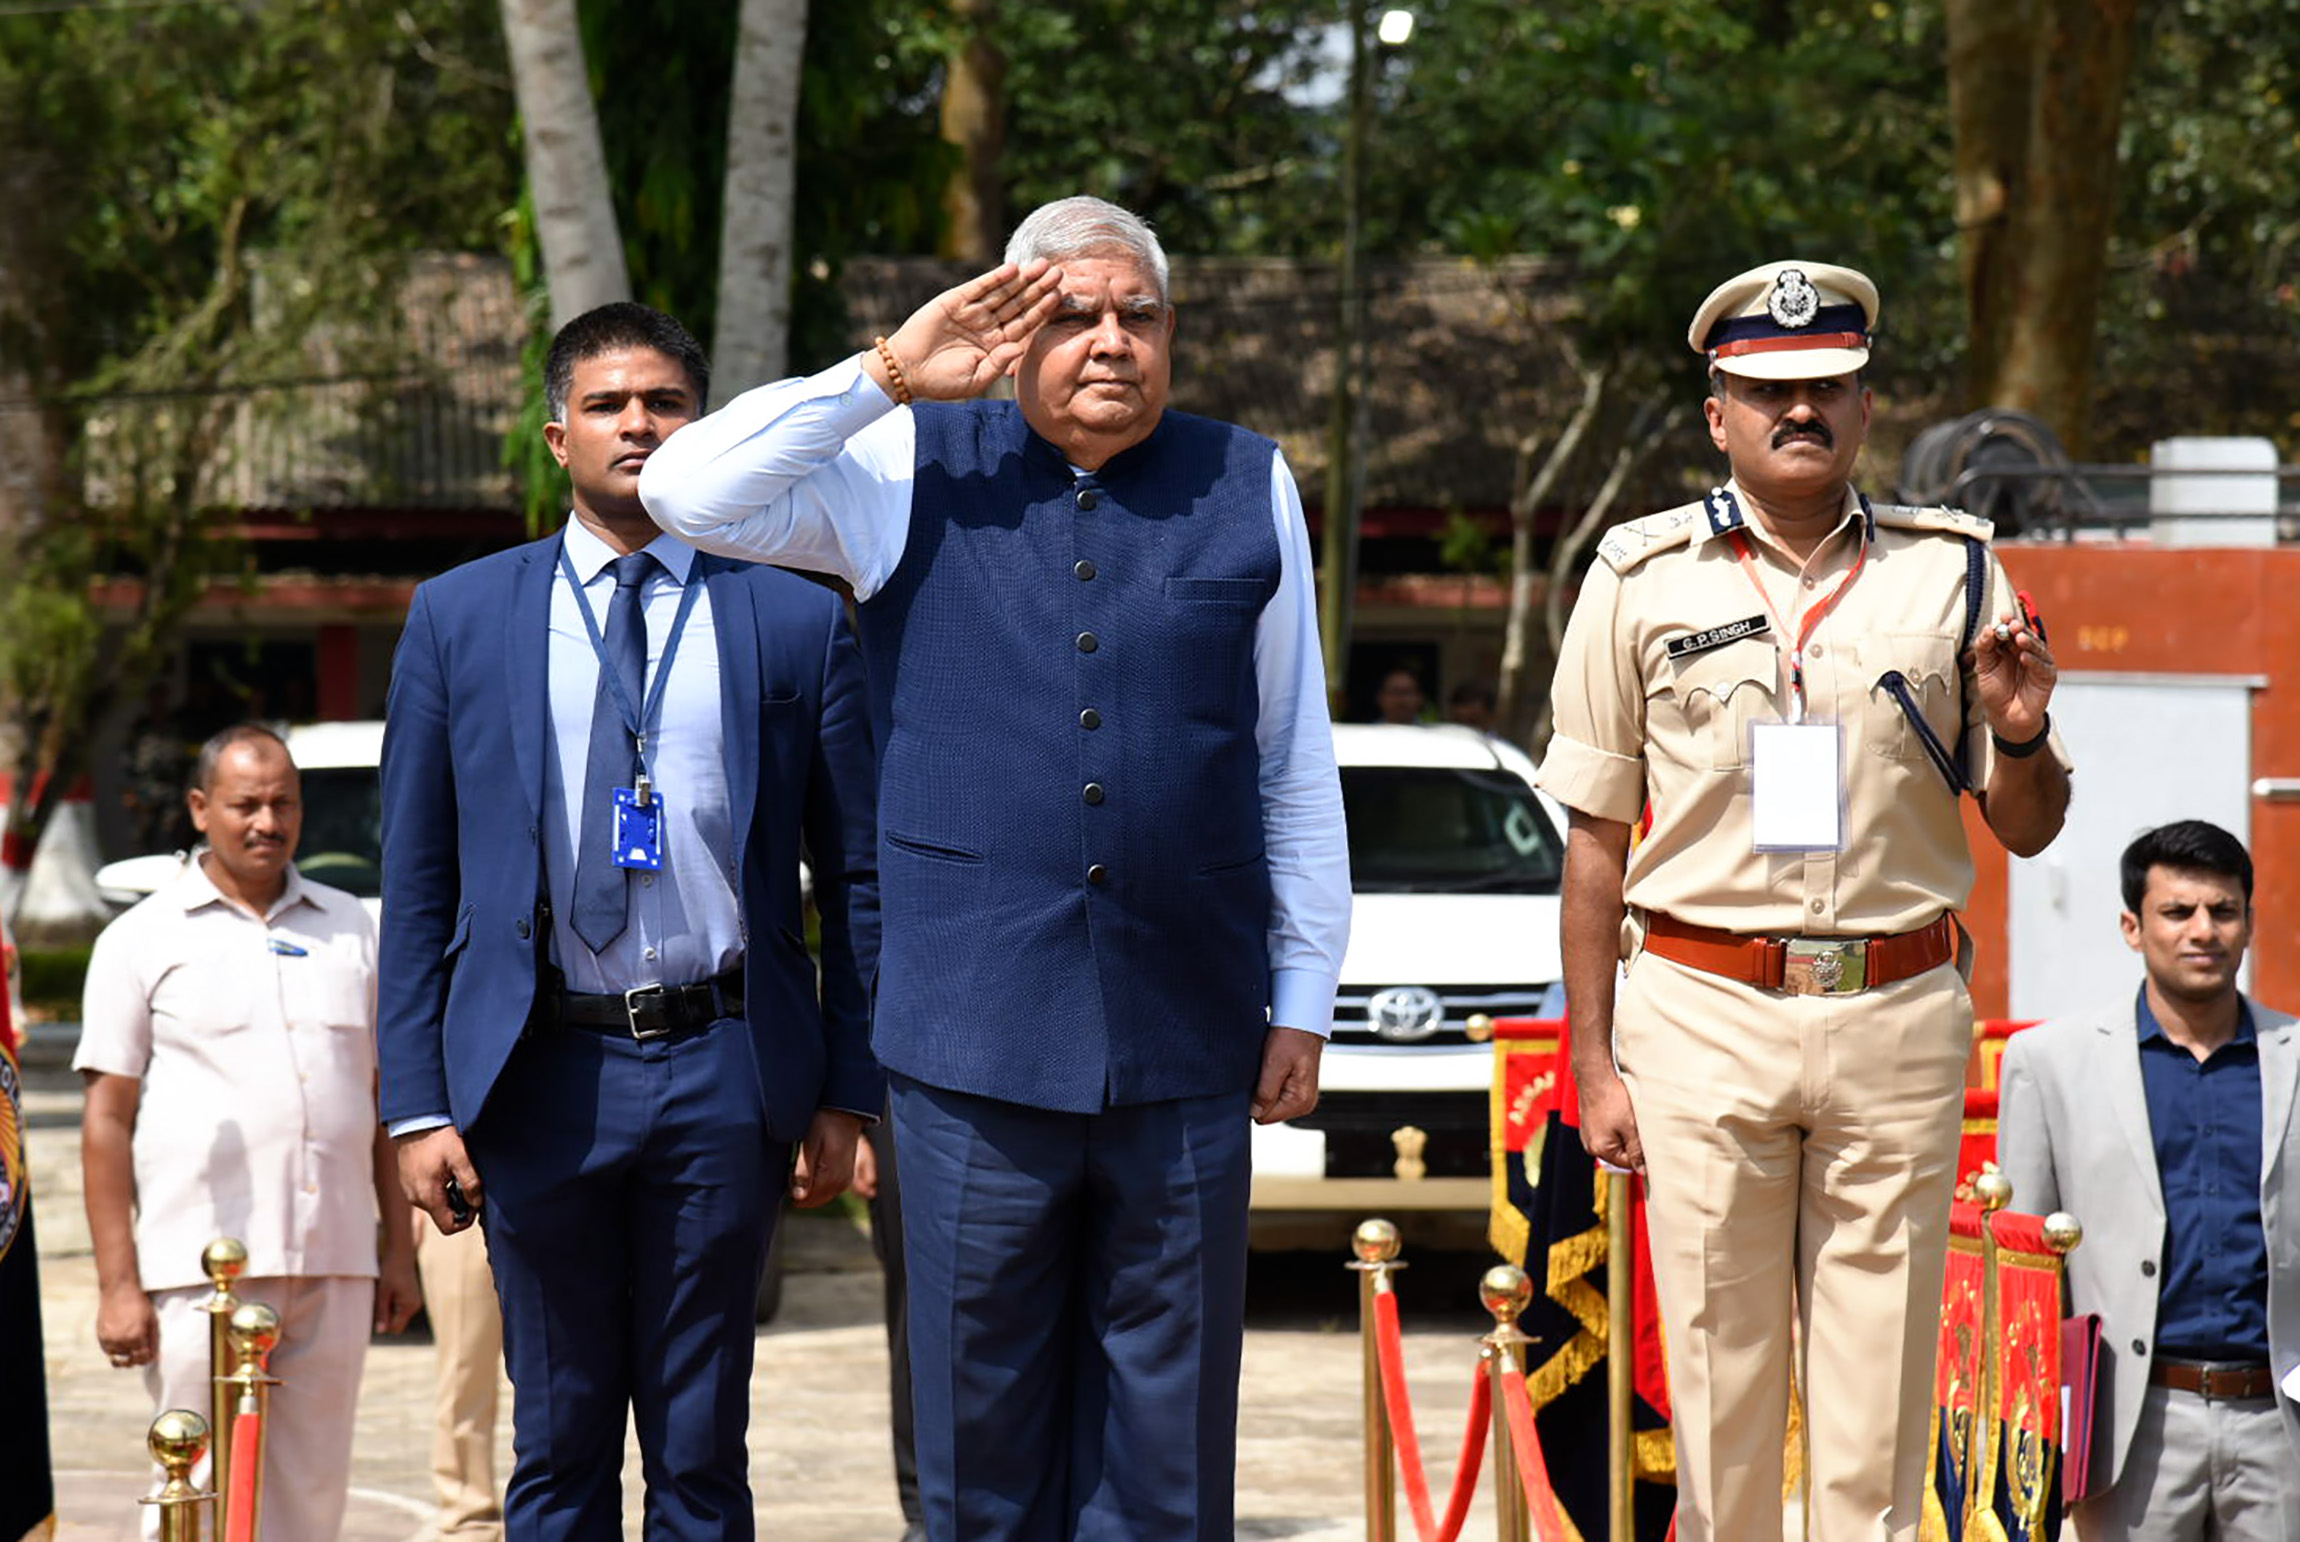 The Vice President, Shri Jagdeep Dhankhar inspecting the Guard of Honour on his arrival in Guwahati, Assam on September 22, 2022.